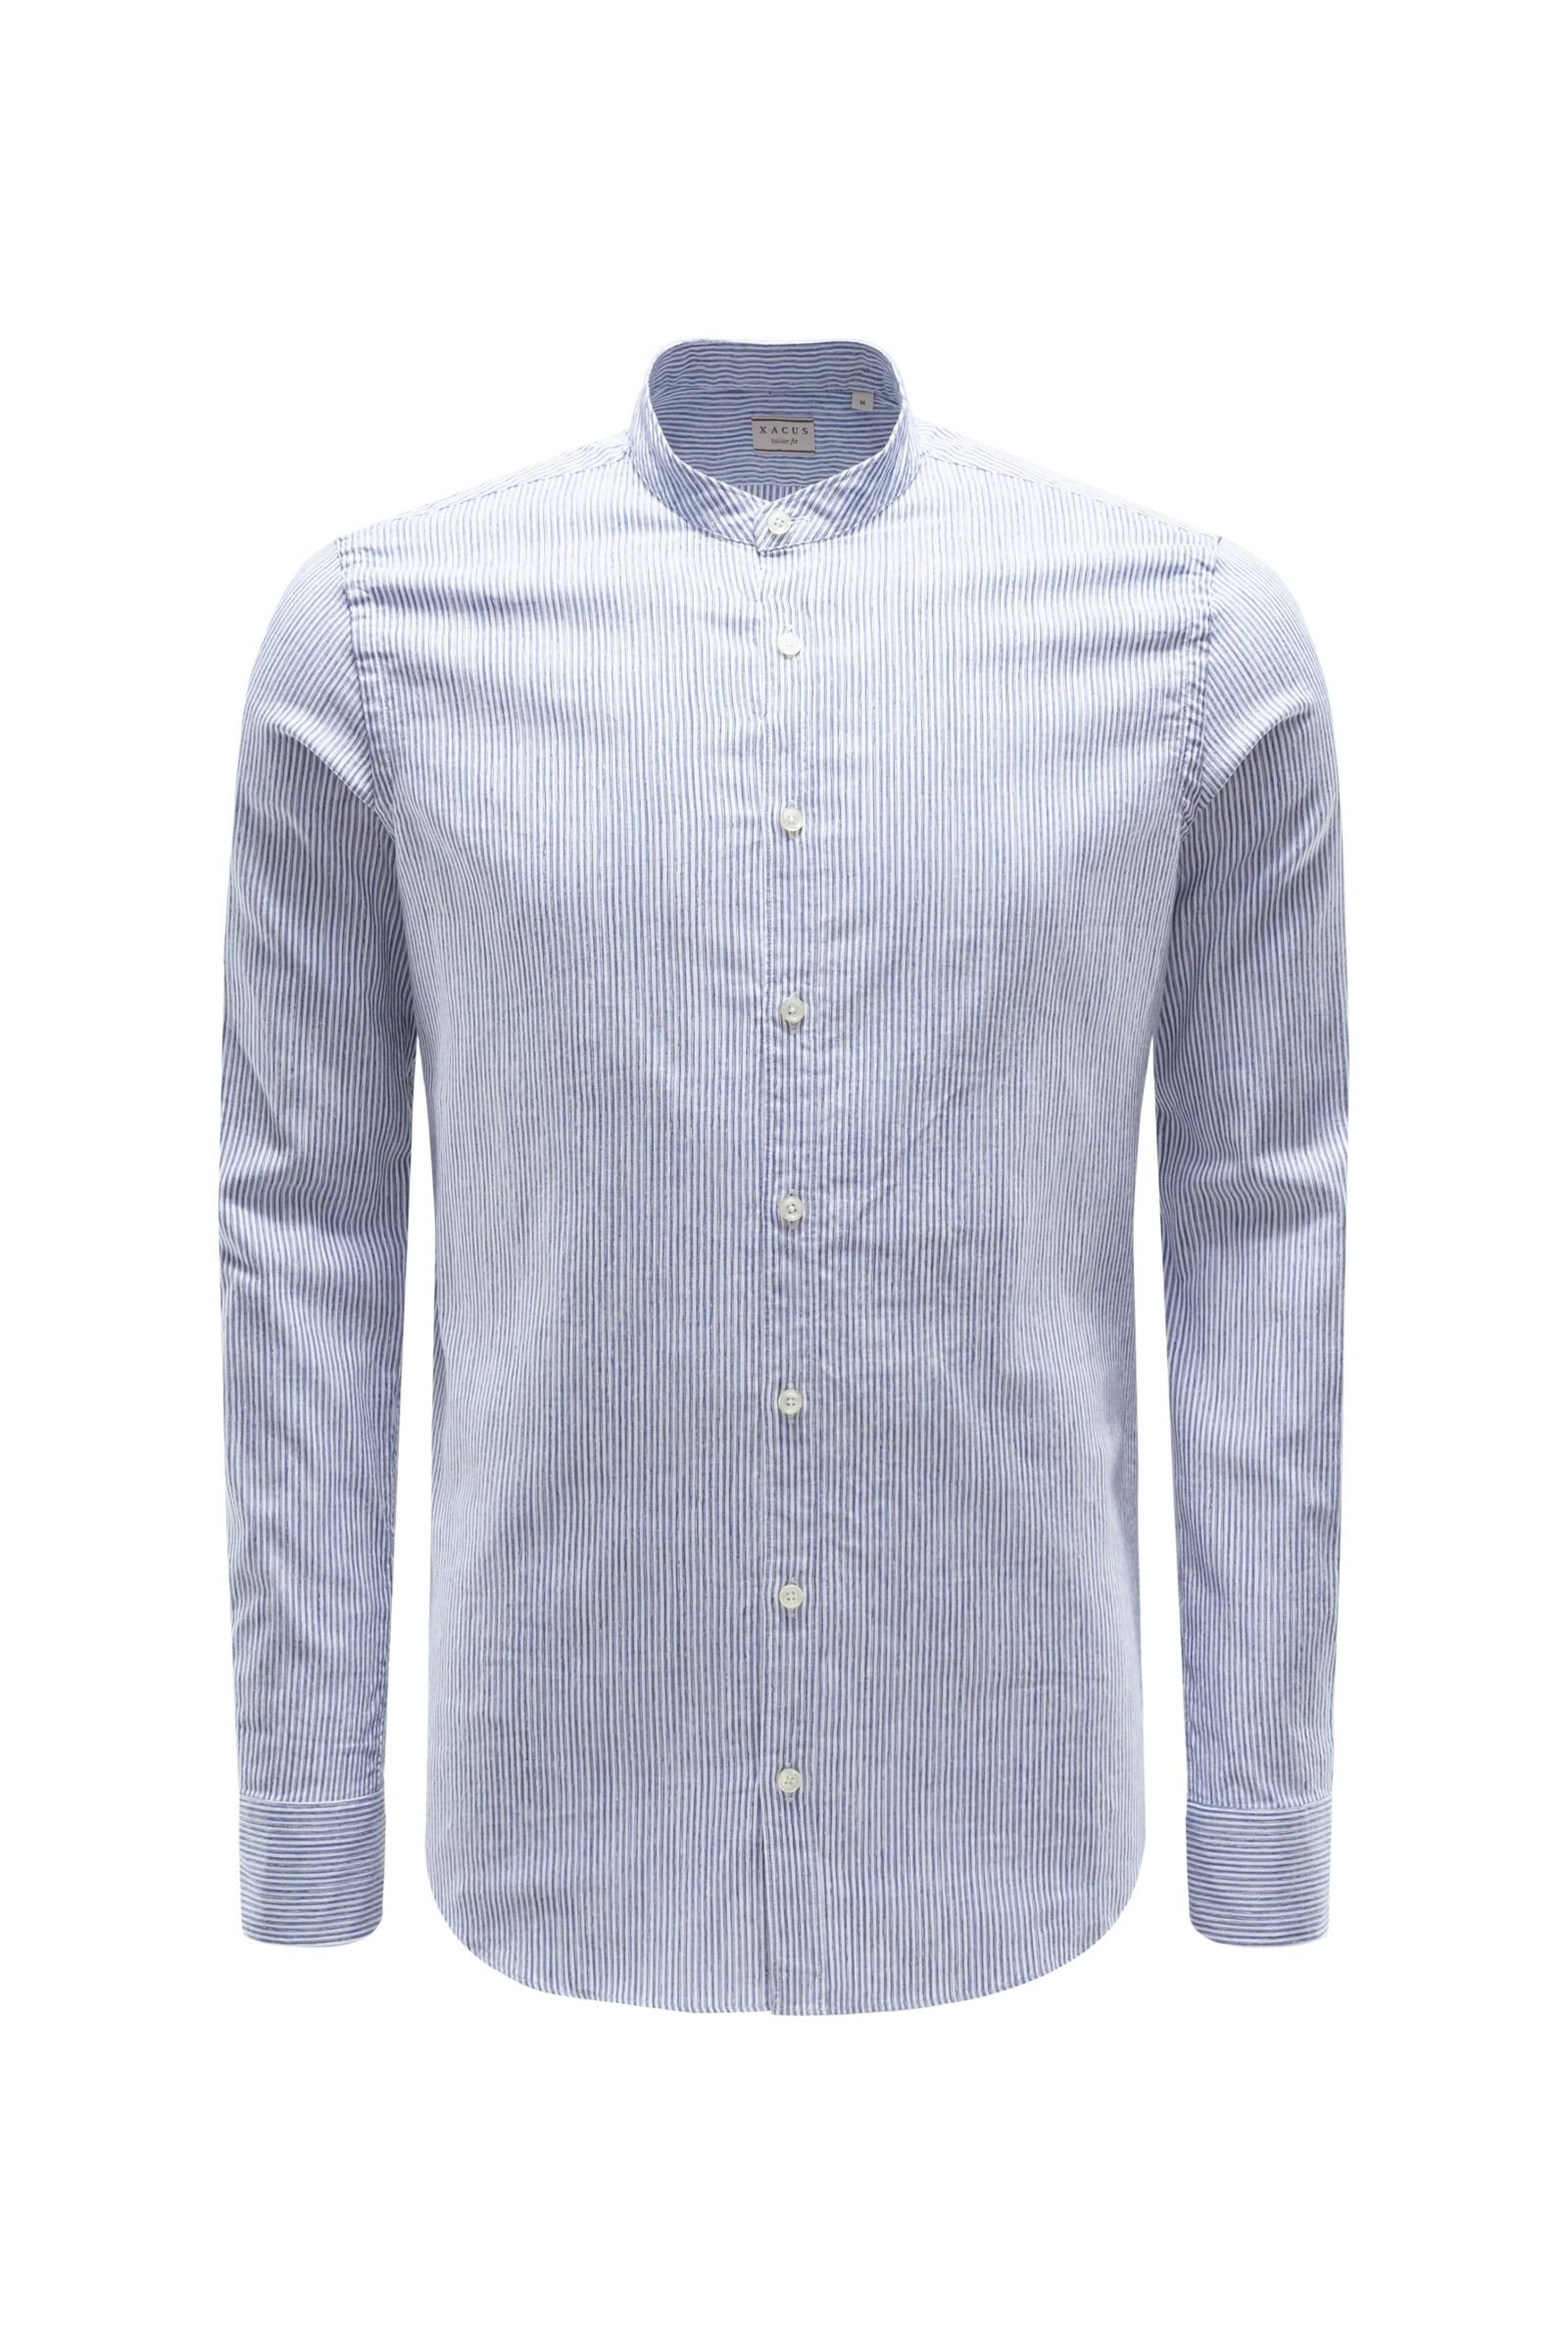 Casual shirt 'Tailor Fit' grandad collar grey-blue/white striped